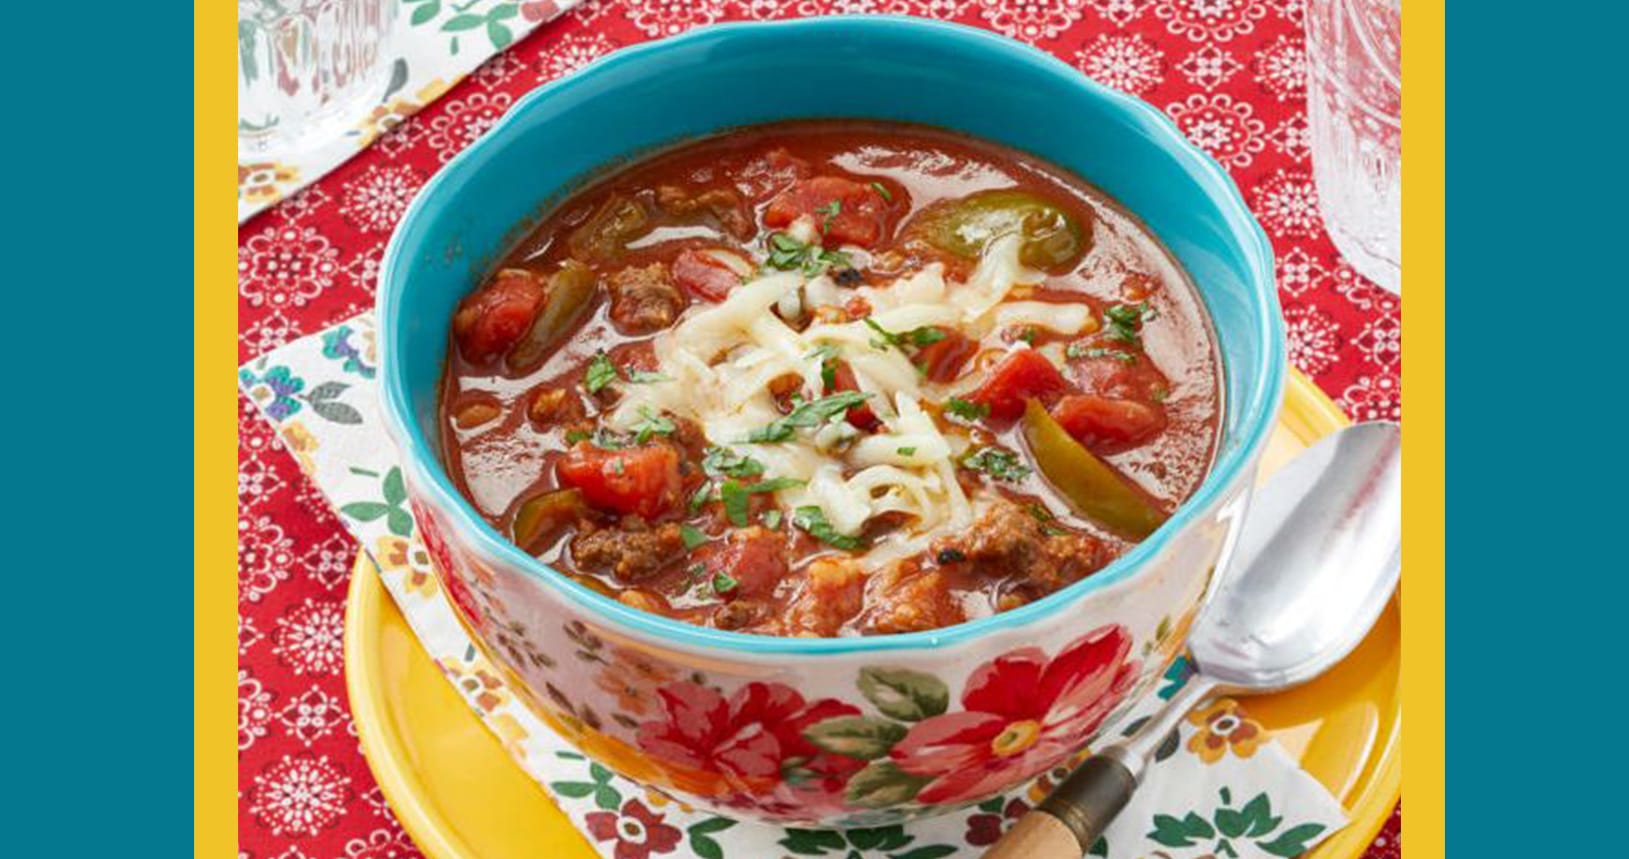 Delicious Stuffed Pepper Soup by Ree Drummond